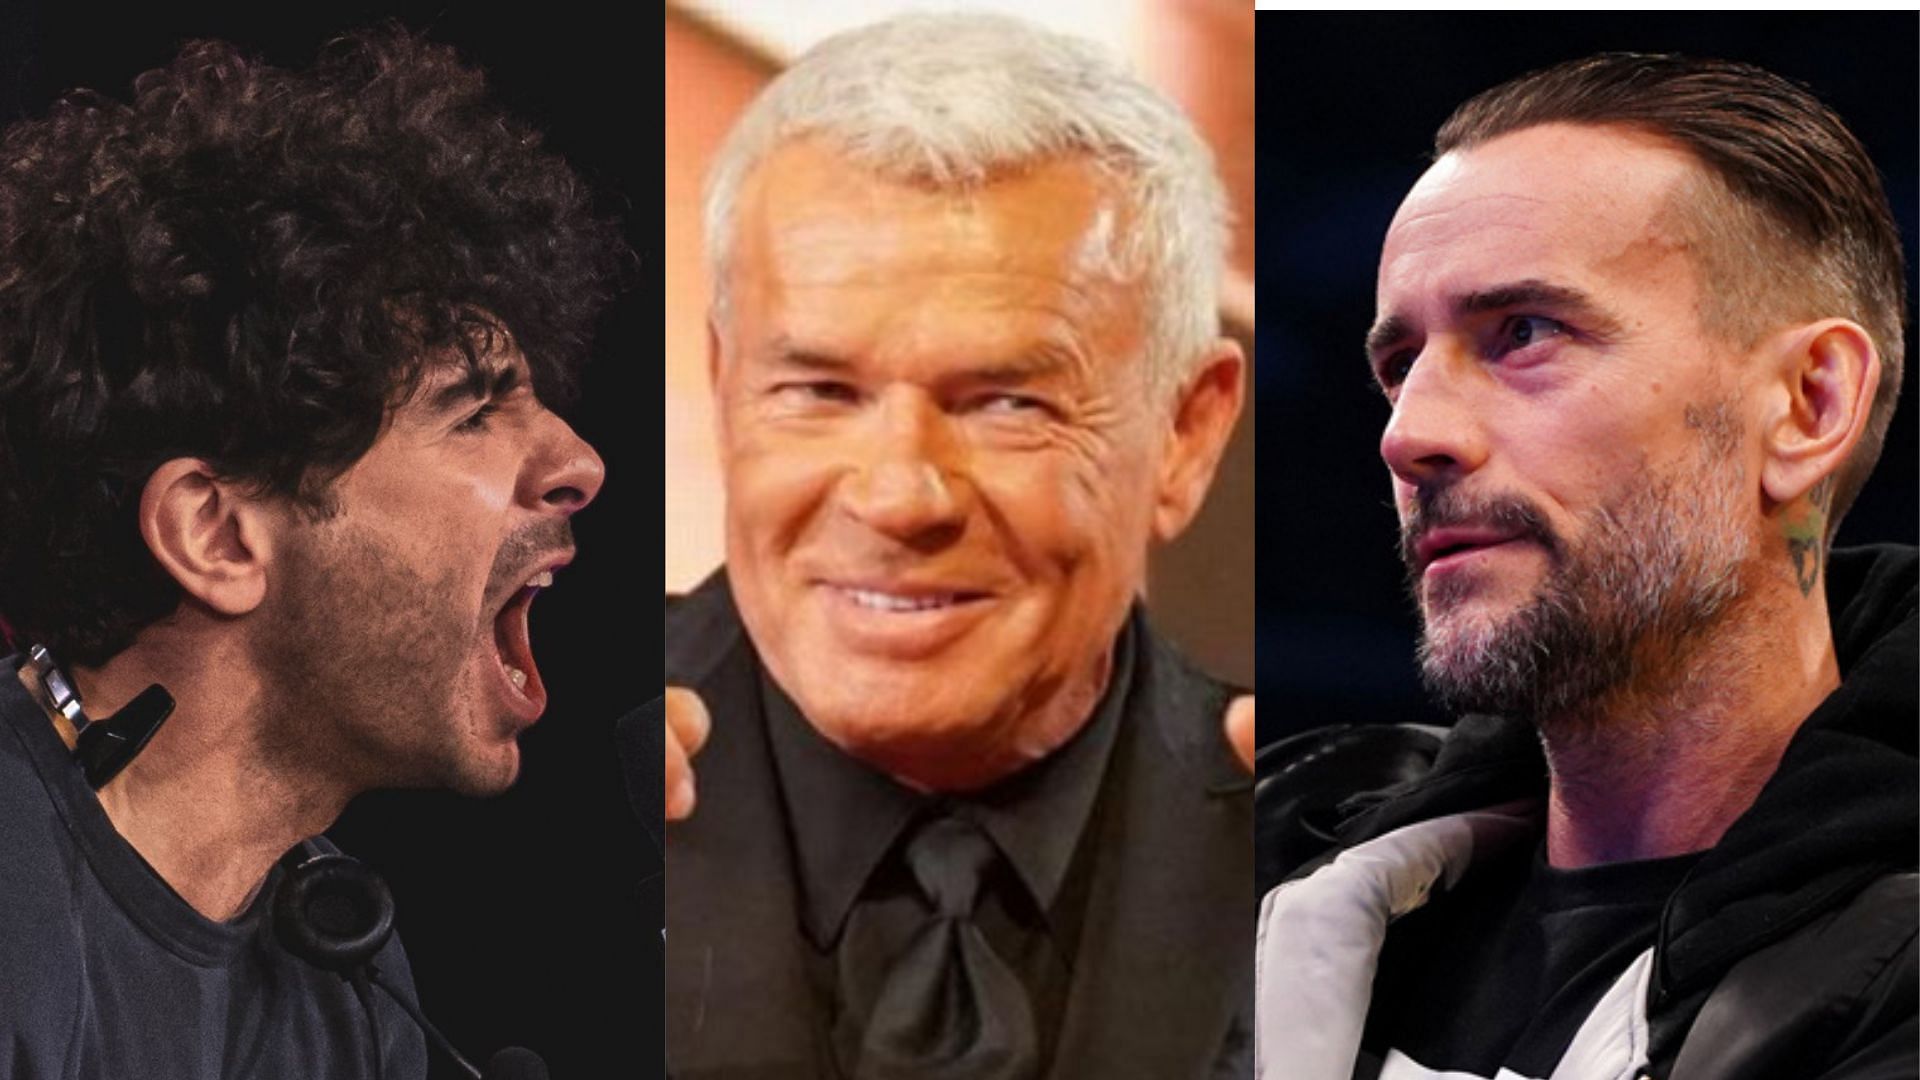 What does Eric Bischoff think Tony Khan should do about CM Punk?